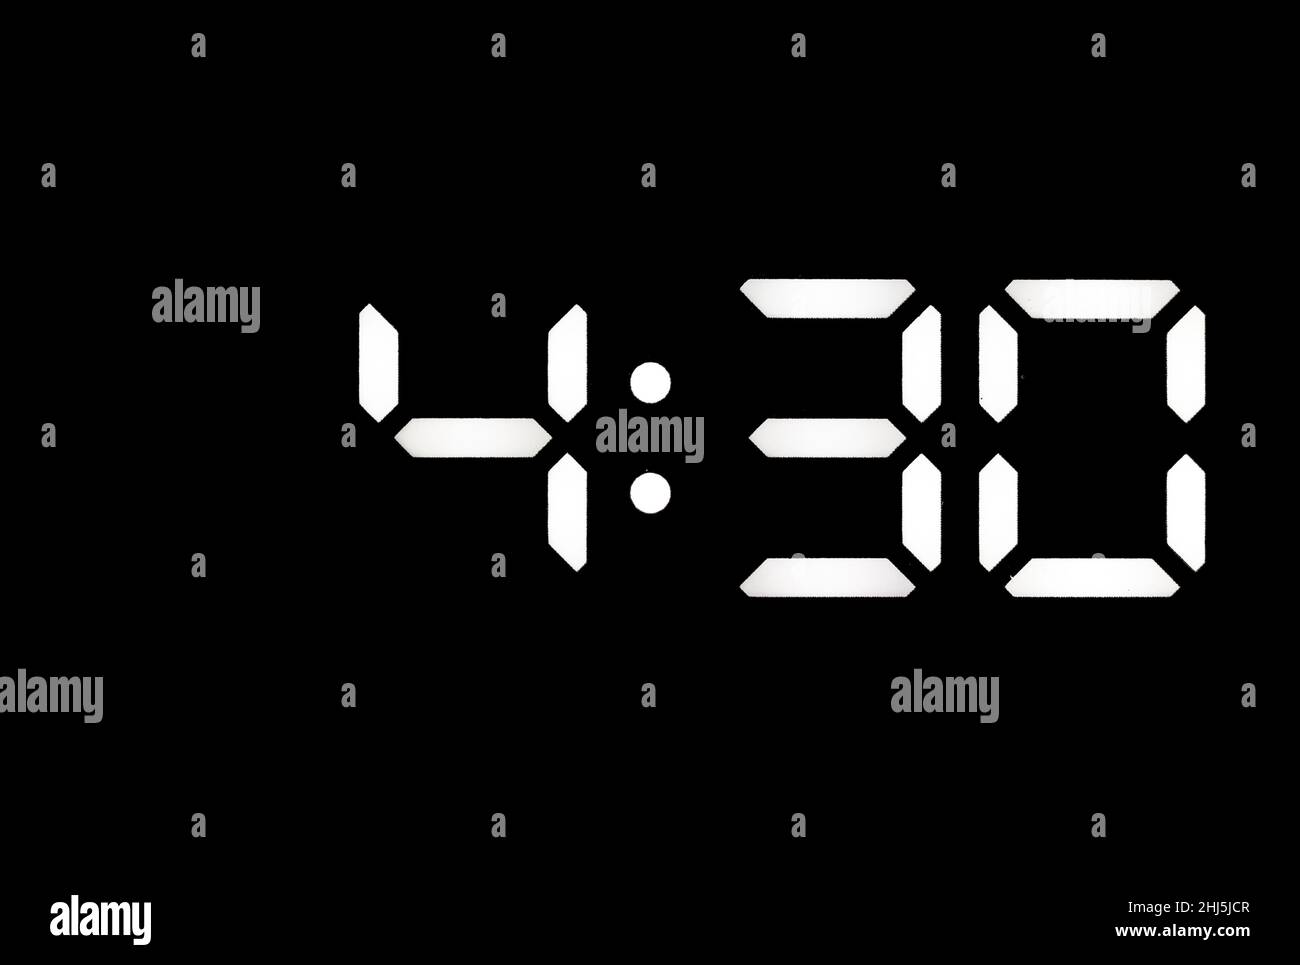 Real white led digital clock on a black background showing time 4:30 Stock Photo